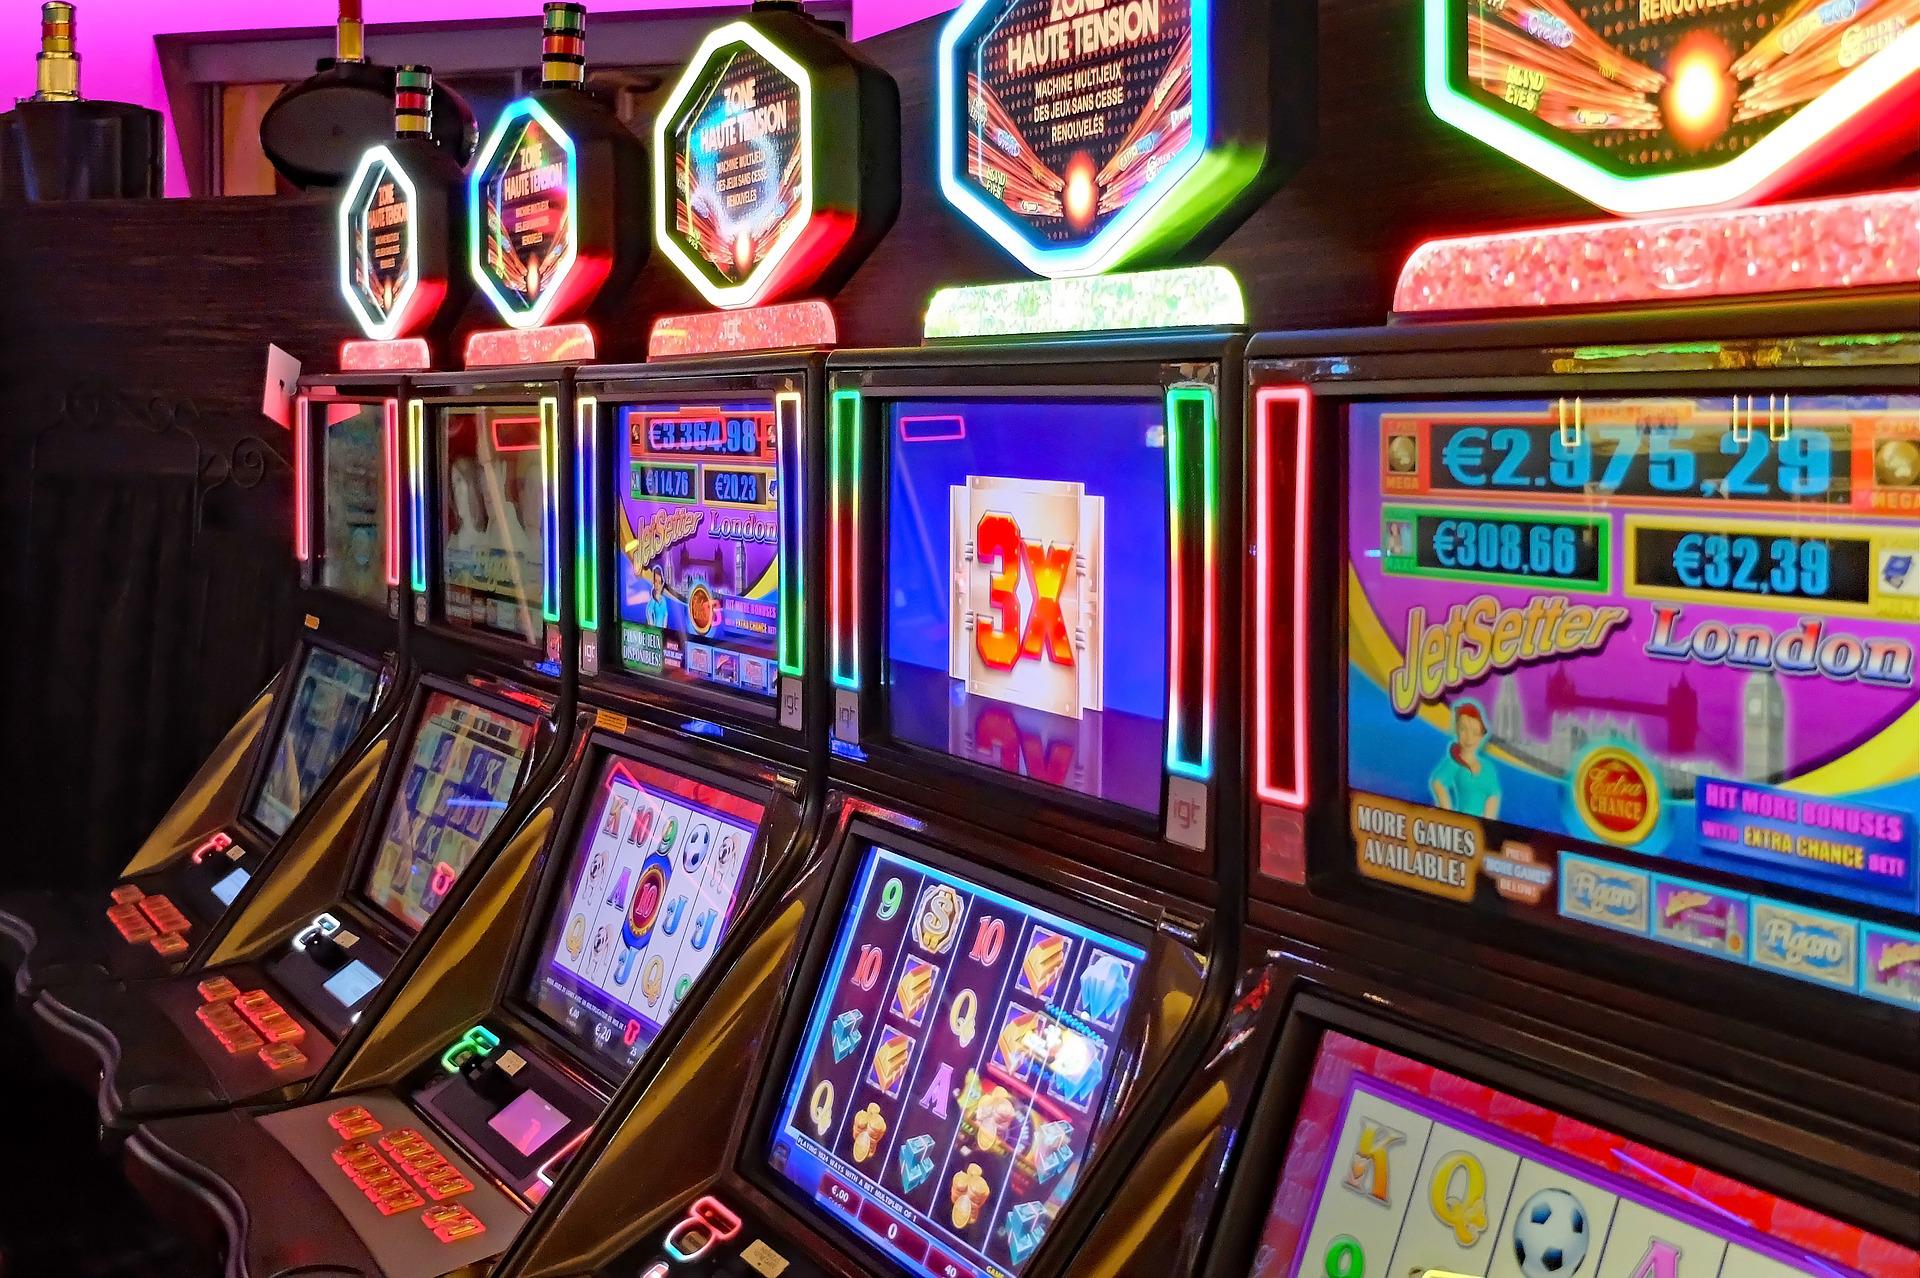 Tips for online slots that could make you a winner